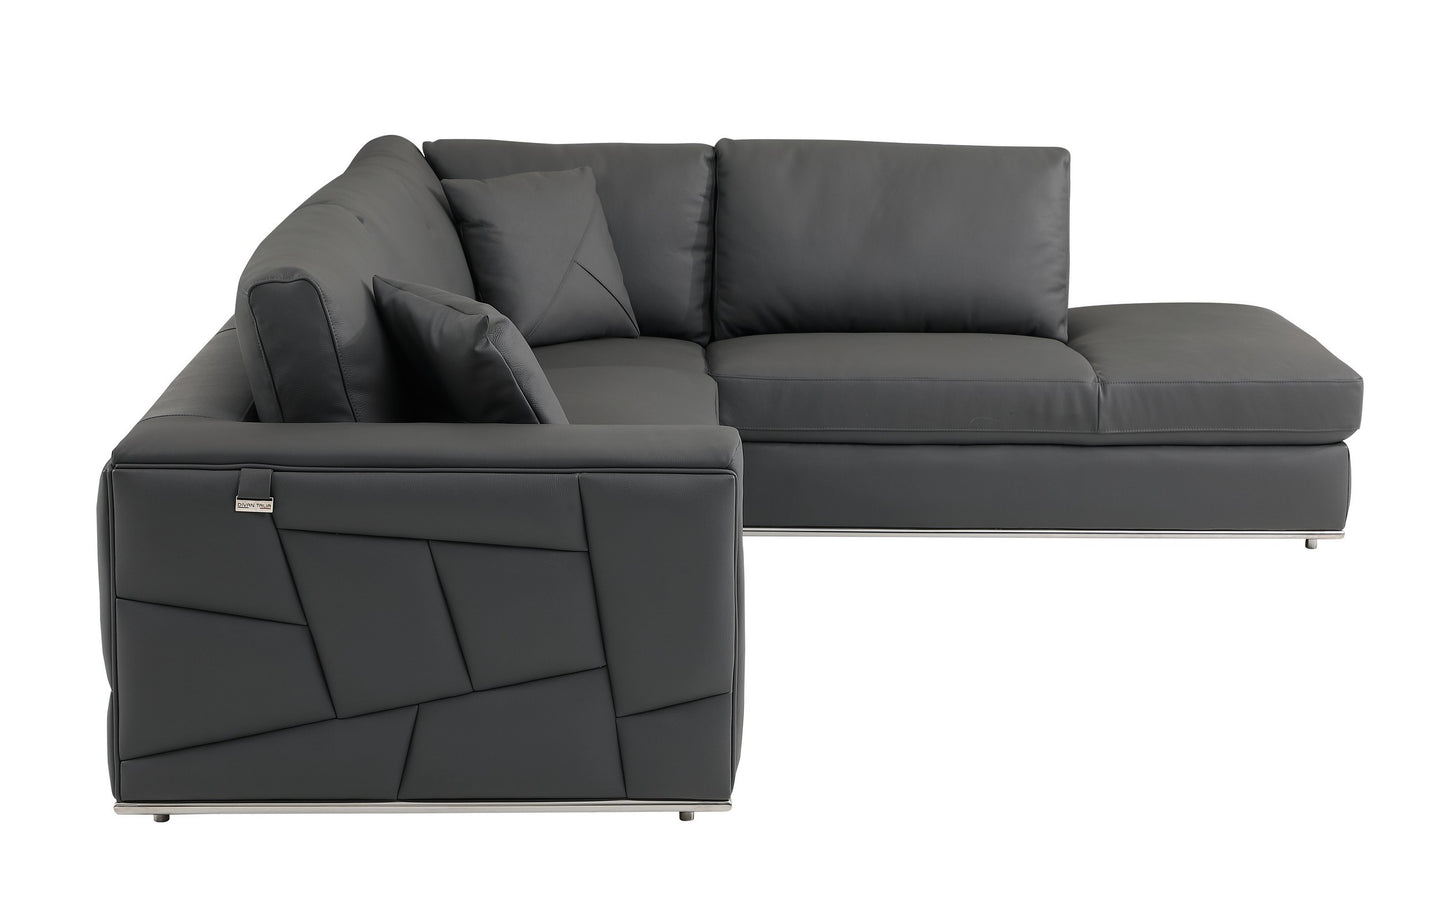 American Eagle 998 Genuine Leather Sectional - 3 Colors